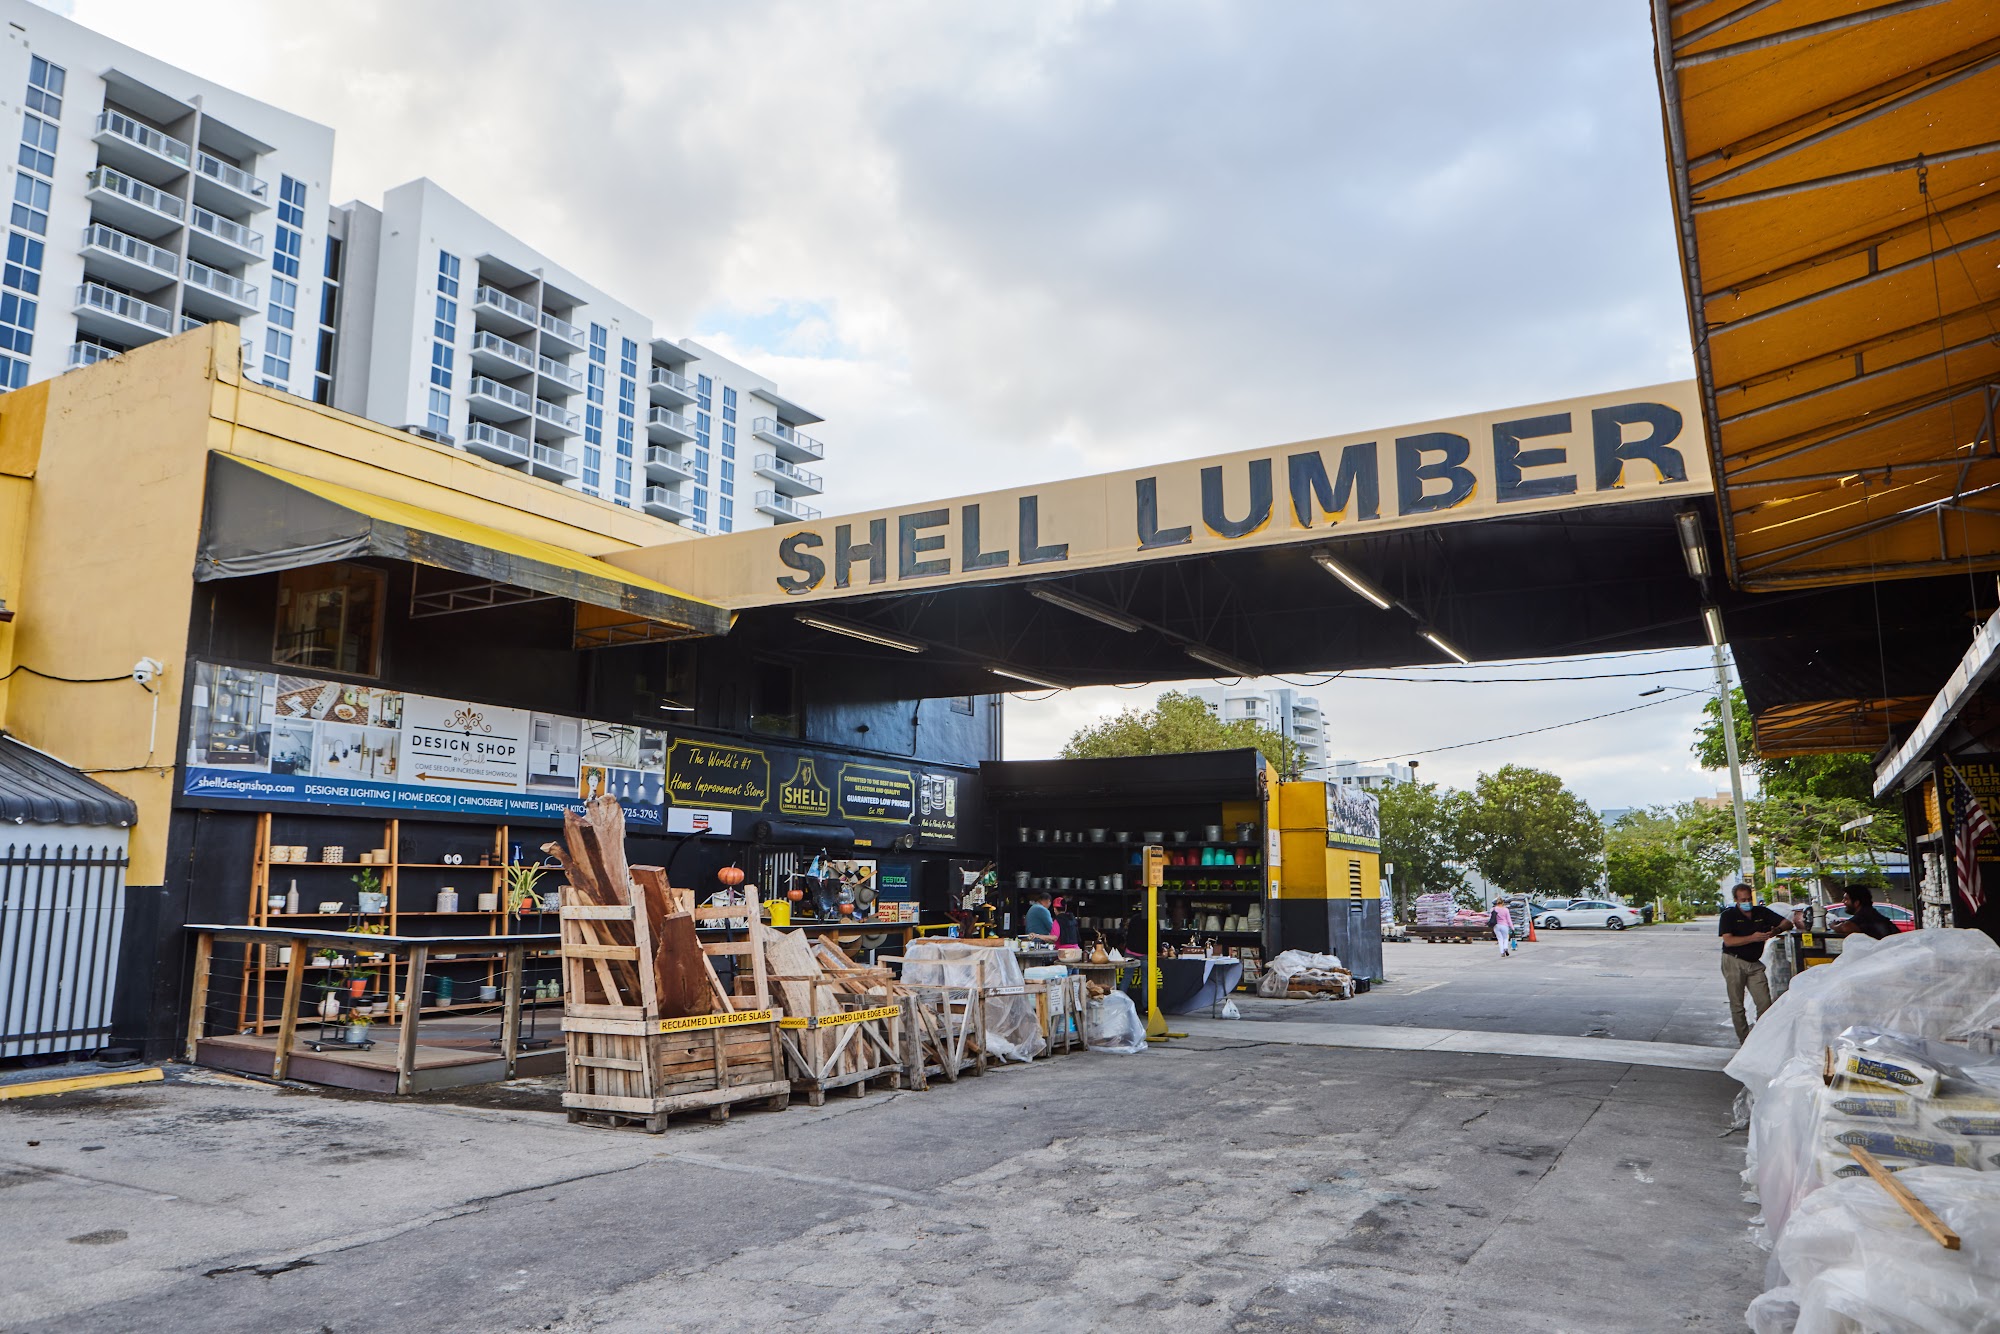 Shell Lumber and Hardware